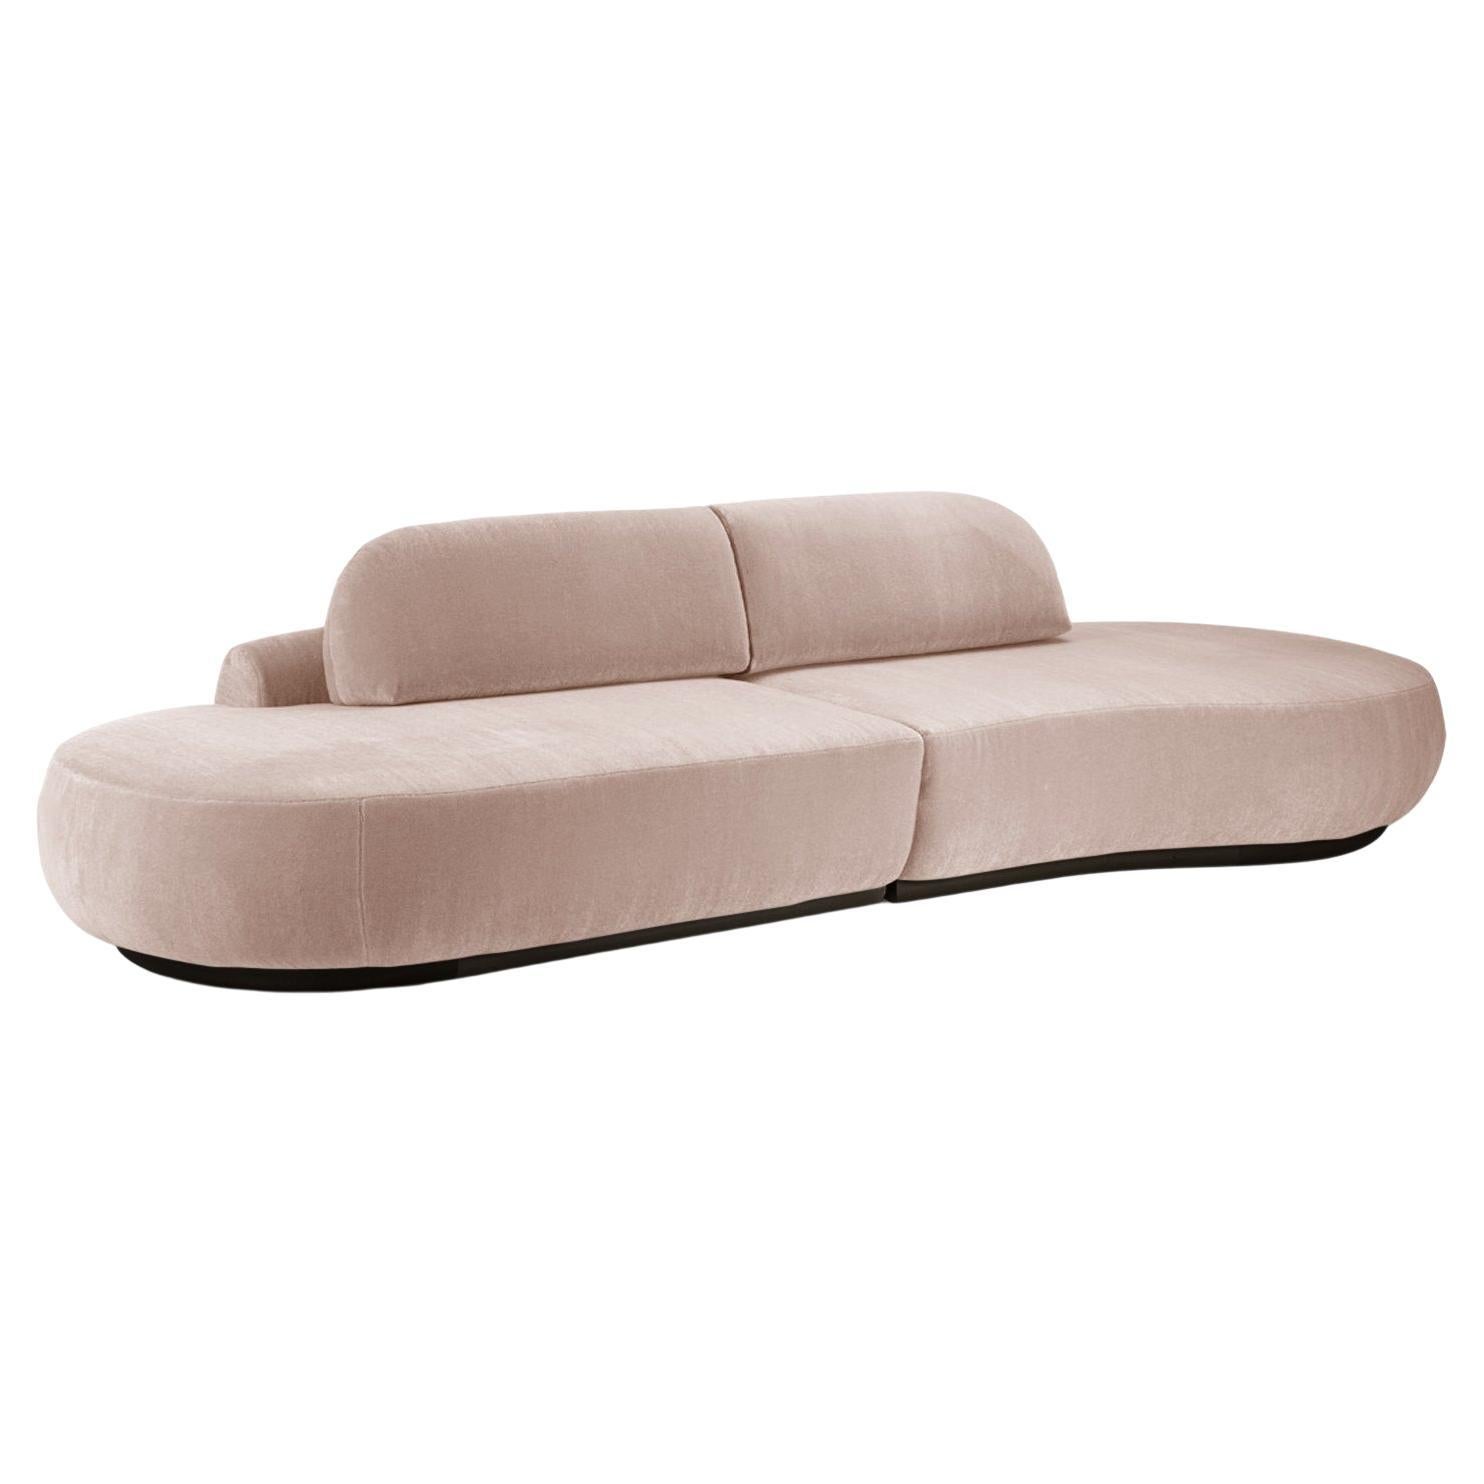 Naked Curved Sectional Sofa, 2 Piece with Beech Ash-056-5 and Vigo Blossom